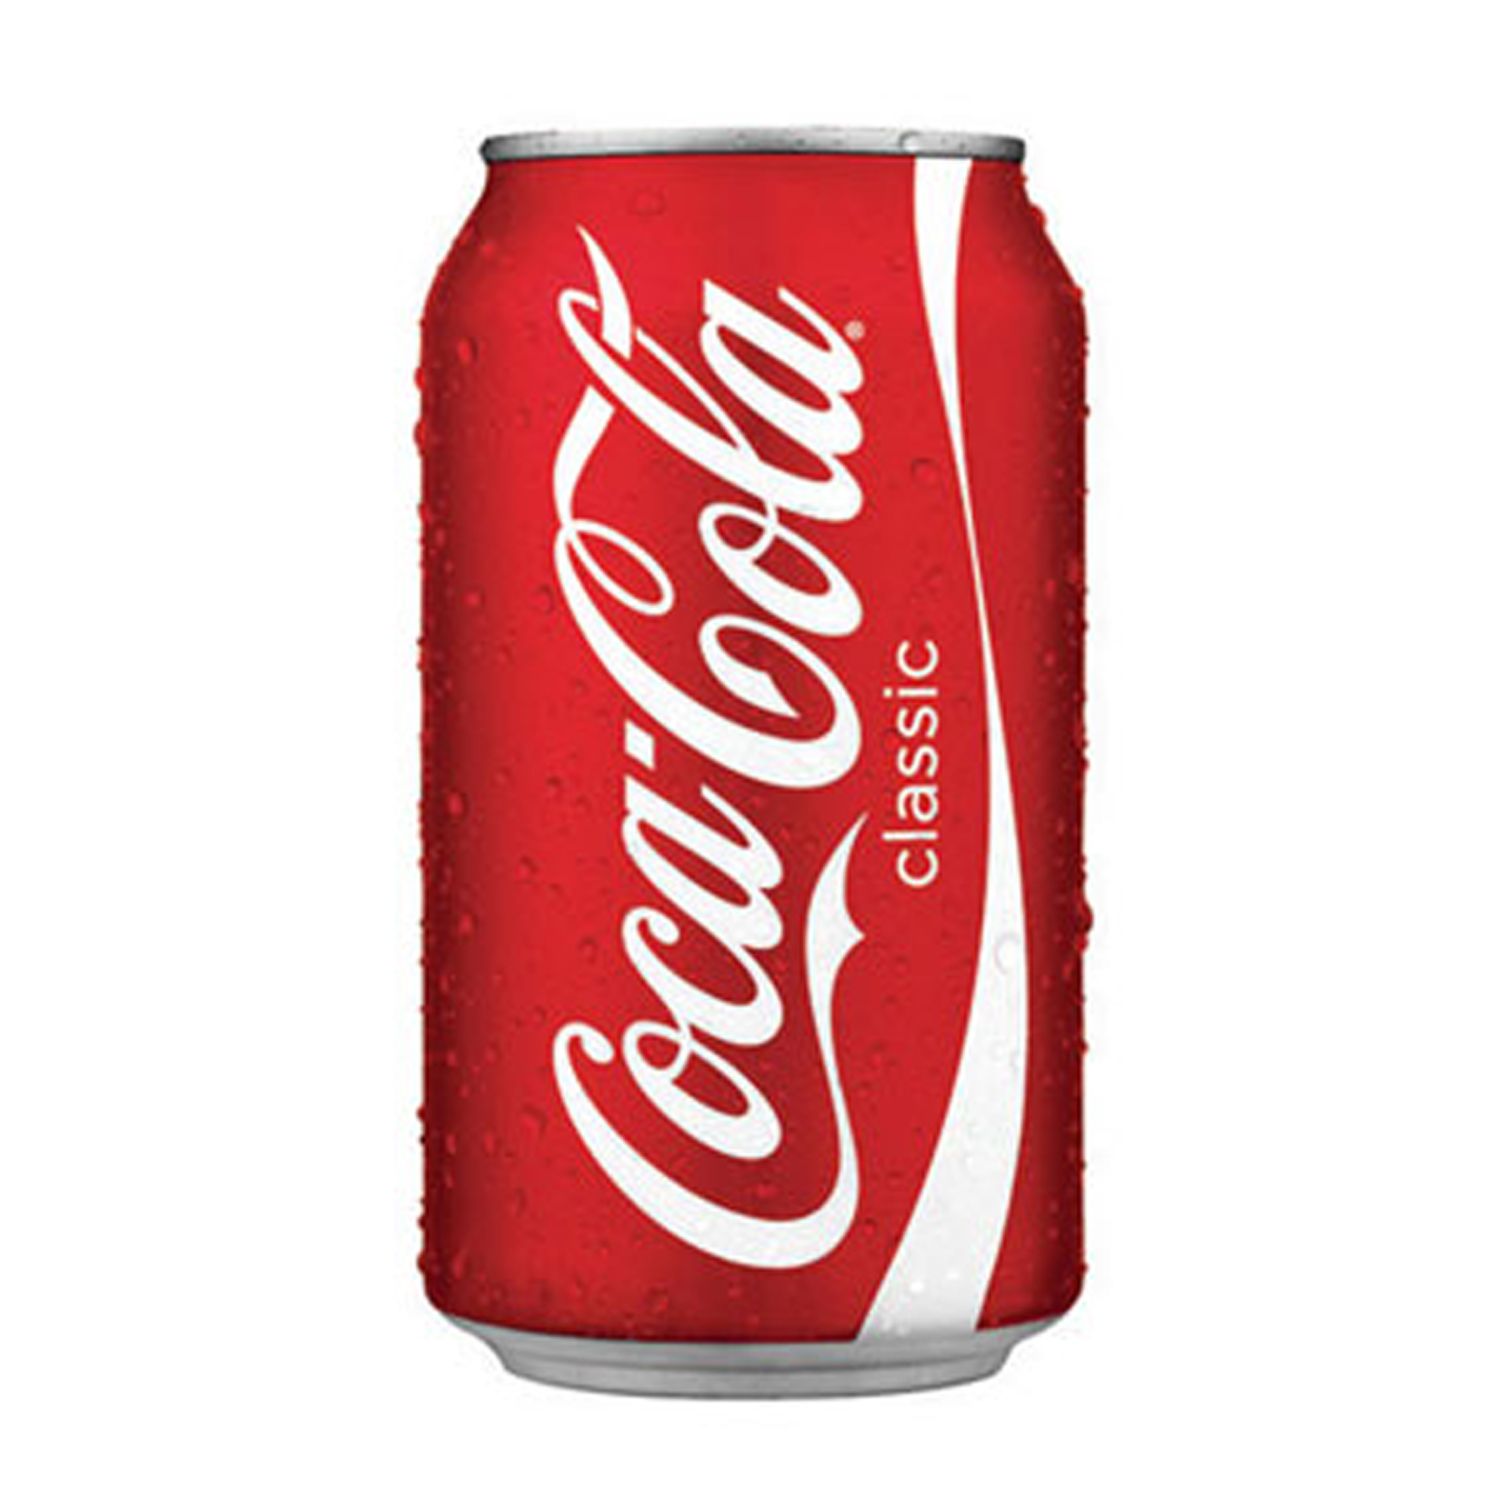 Soda can clip art viewing free clipart images